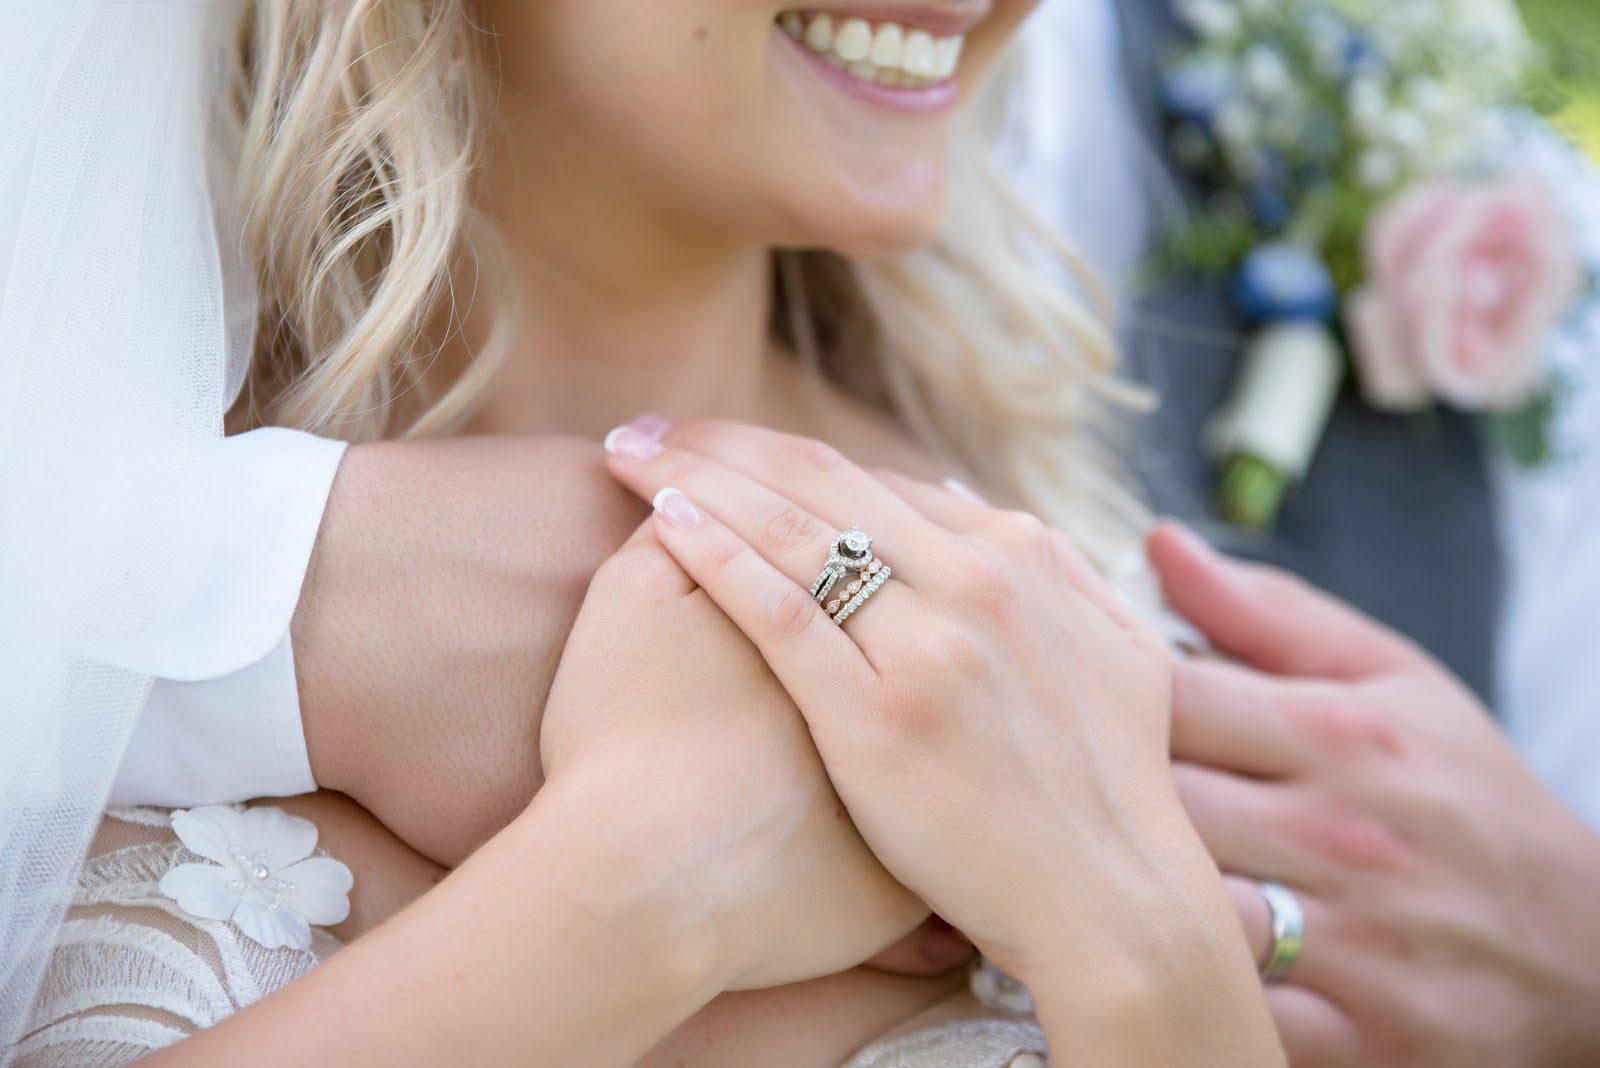 STACKABLE WEDDING BANDS: TIPS TO MIX AND MATCH METALS